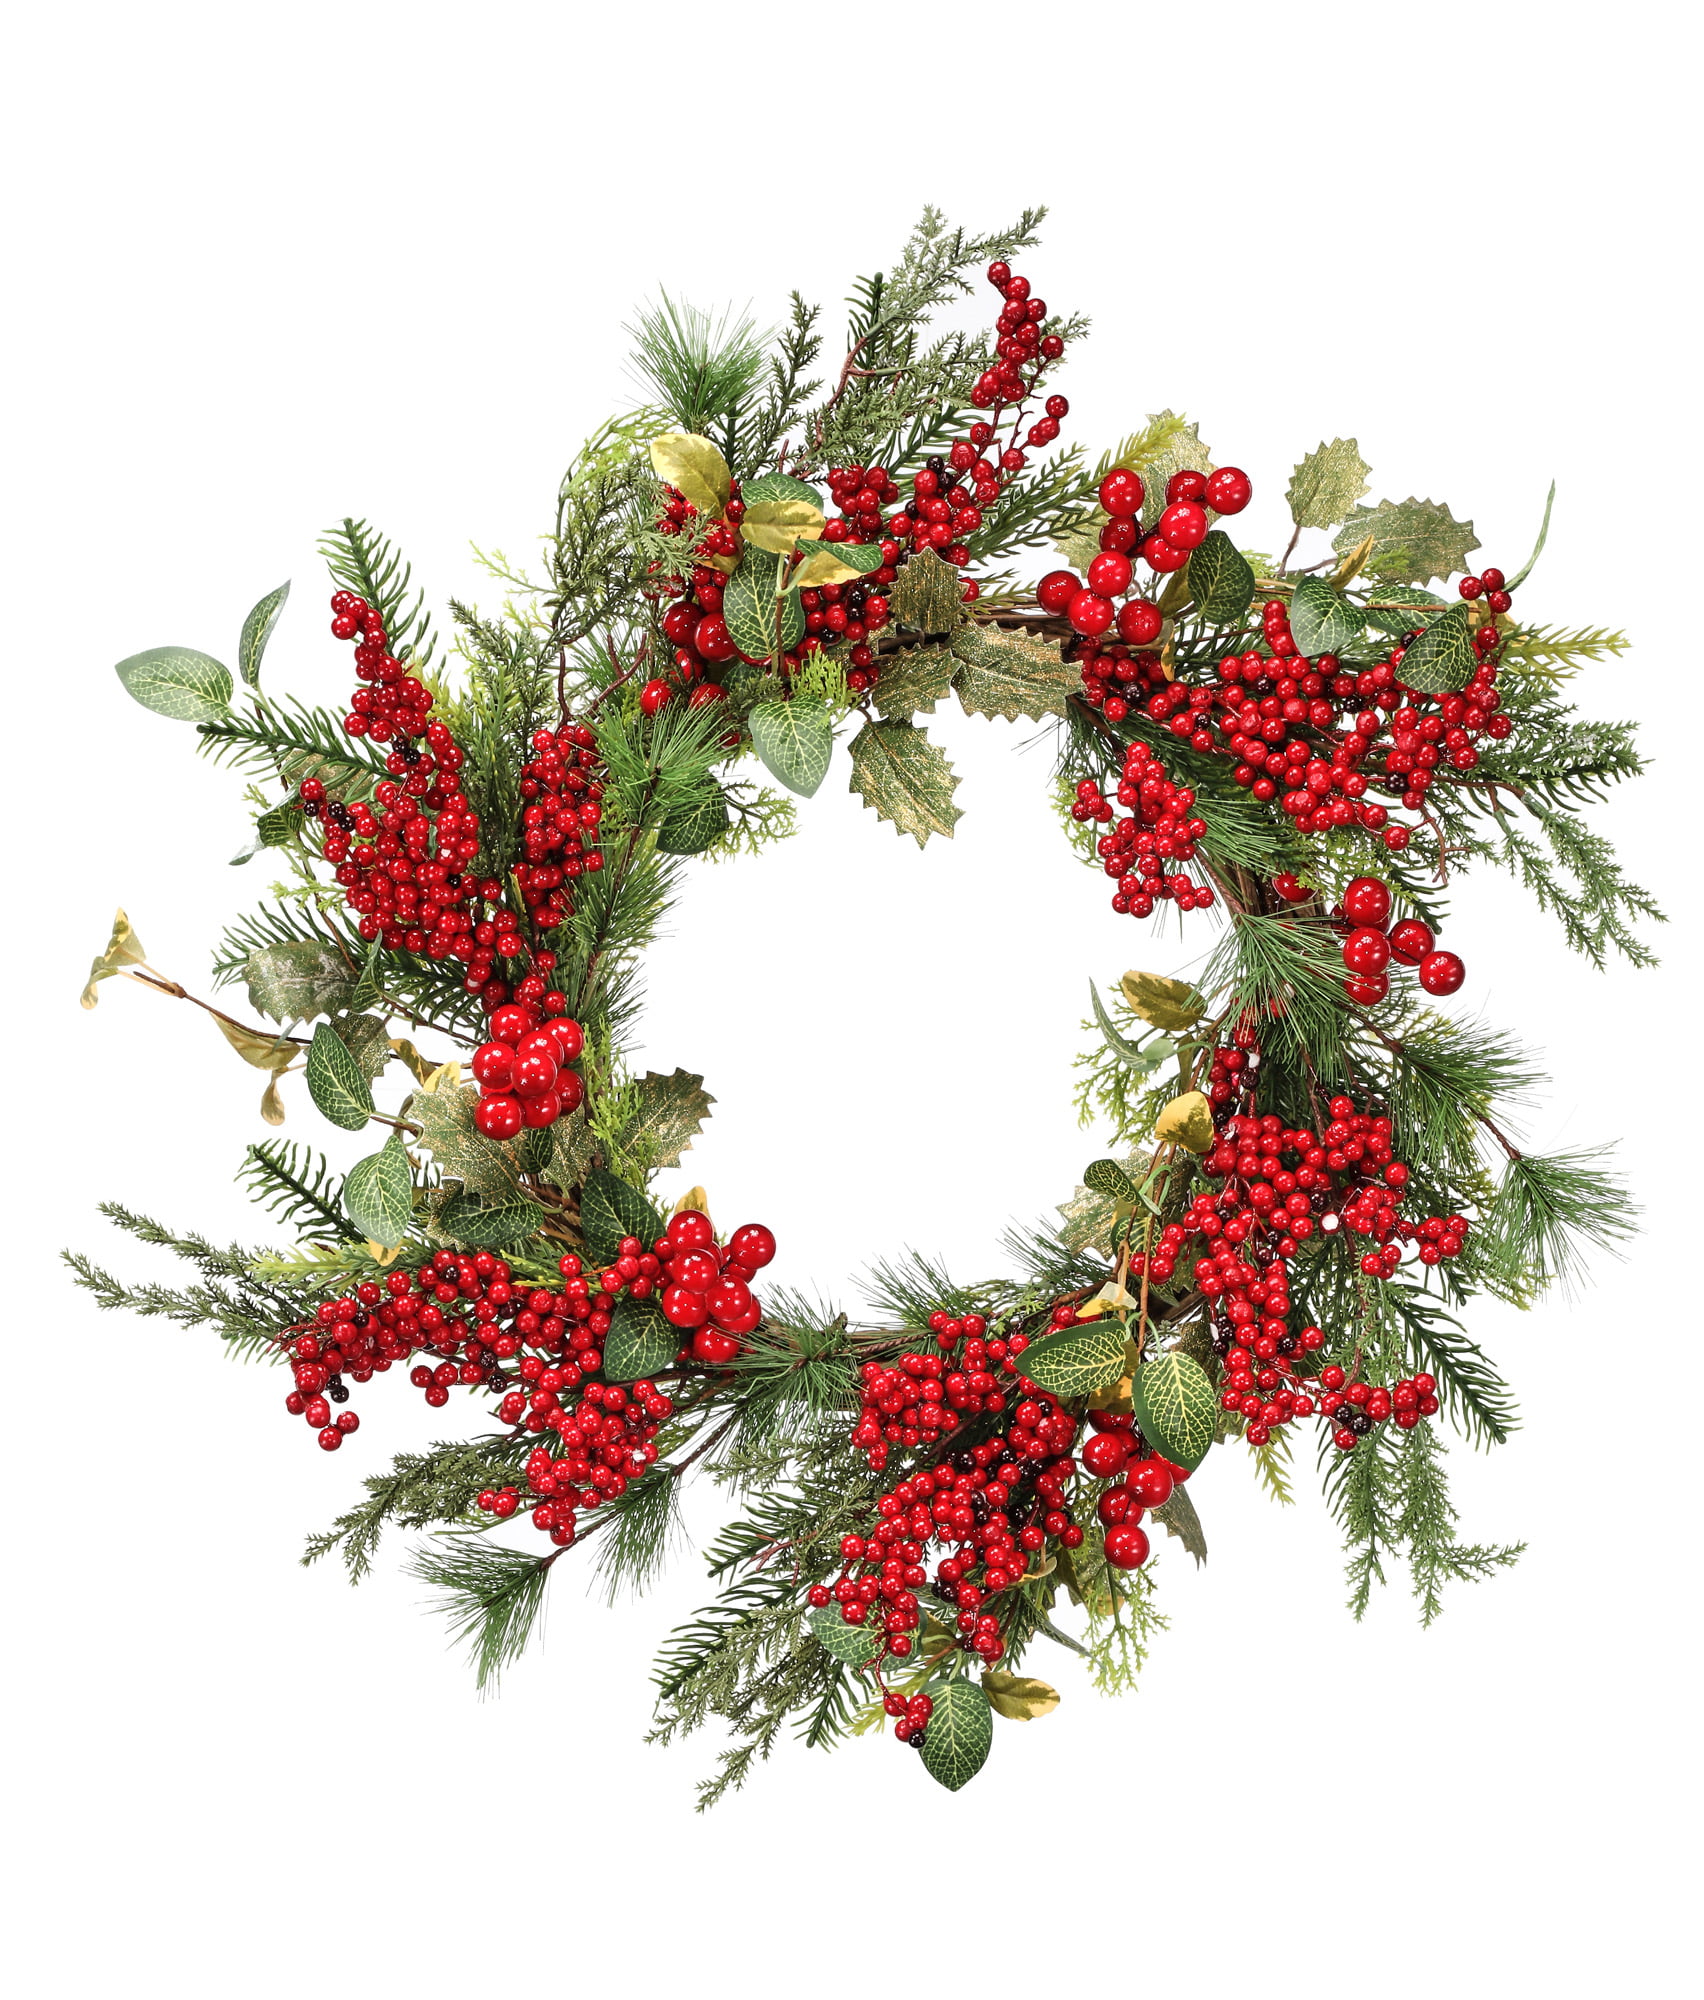 50X Christmas Red Berry Pick Holly Branch Wreath Xmas Tree Hanging Decoration 